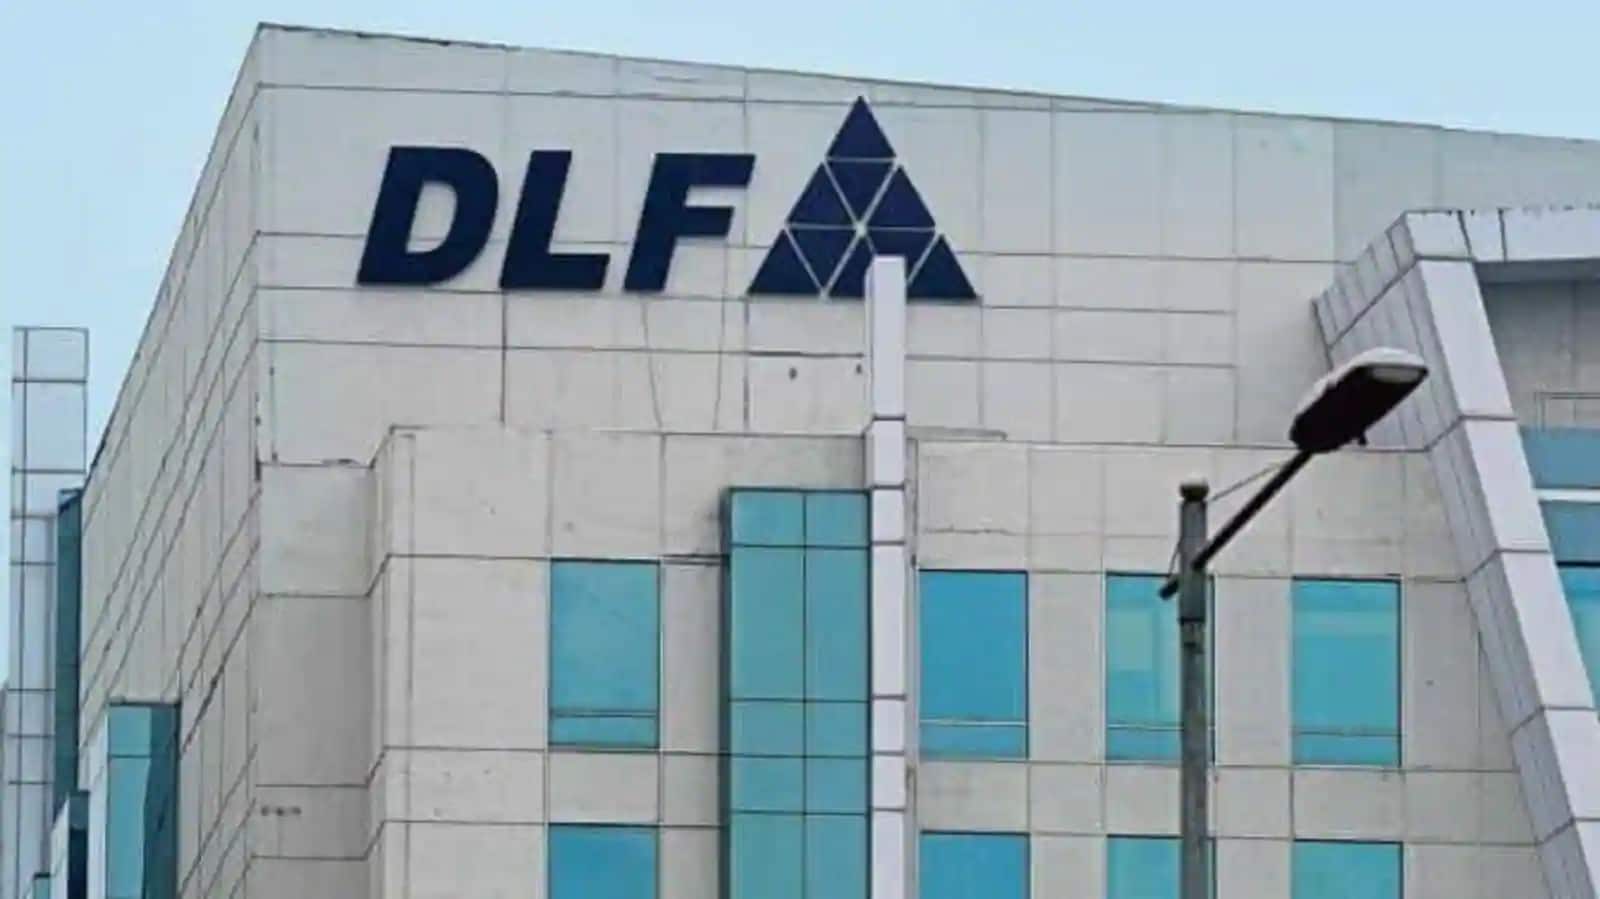 DLF Q4 results: Net profit up 61.5% to Rs 921 crore, revenue up 47% - Moneycontrol